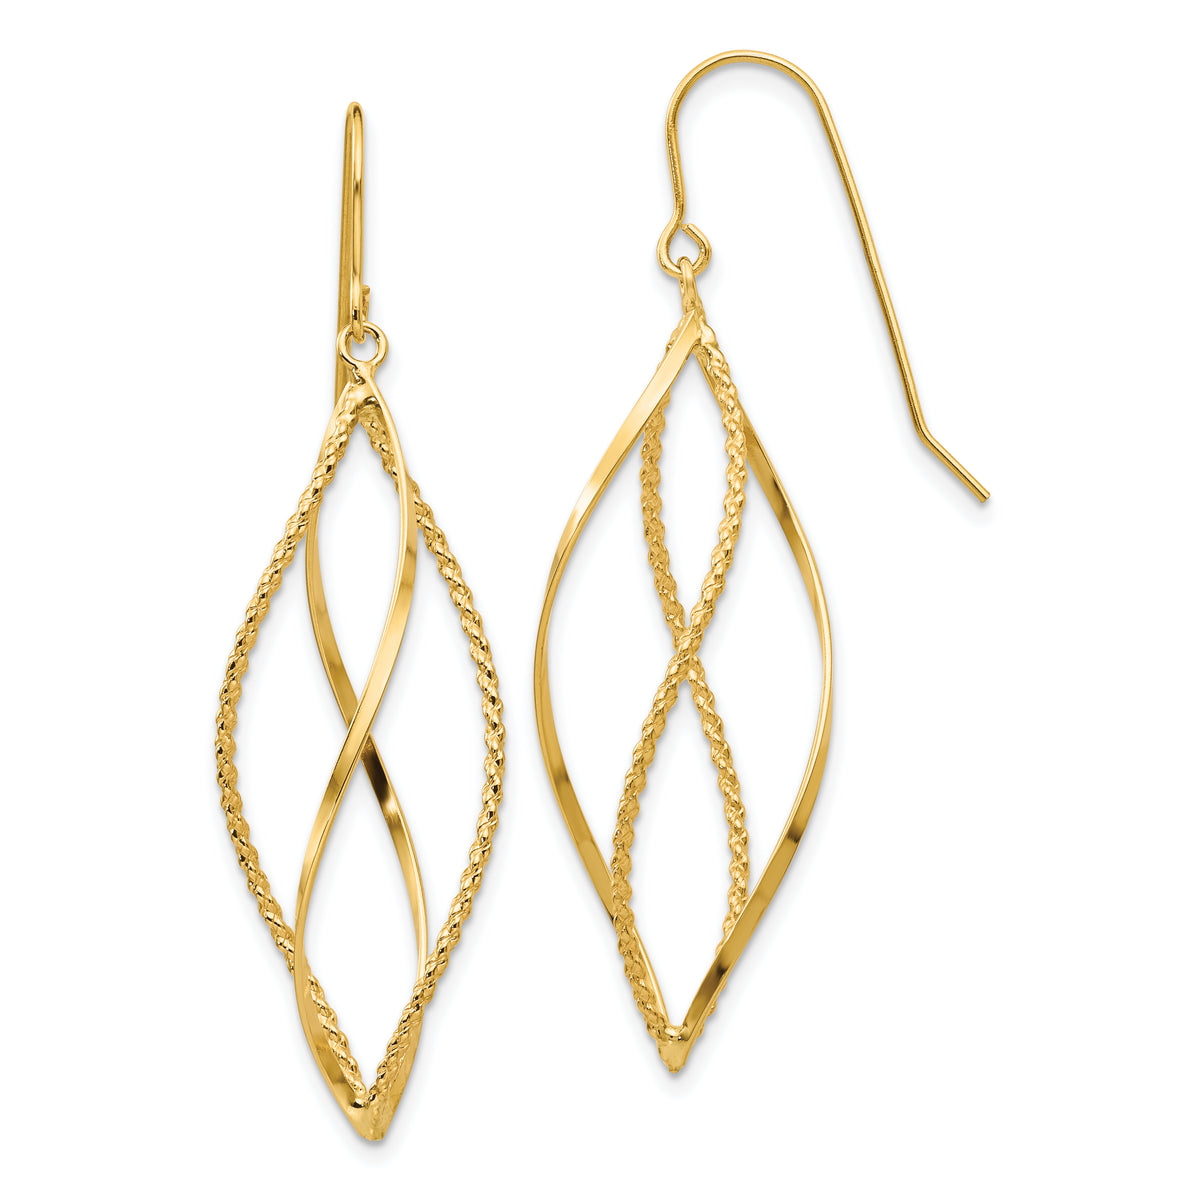 10k Polished and Textured Twisted Dangle Earrings